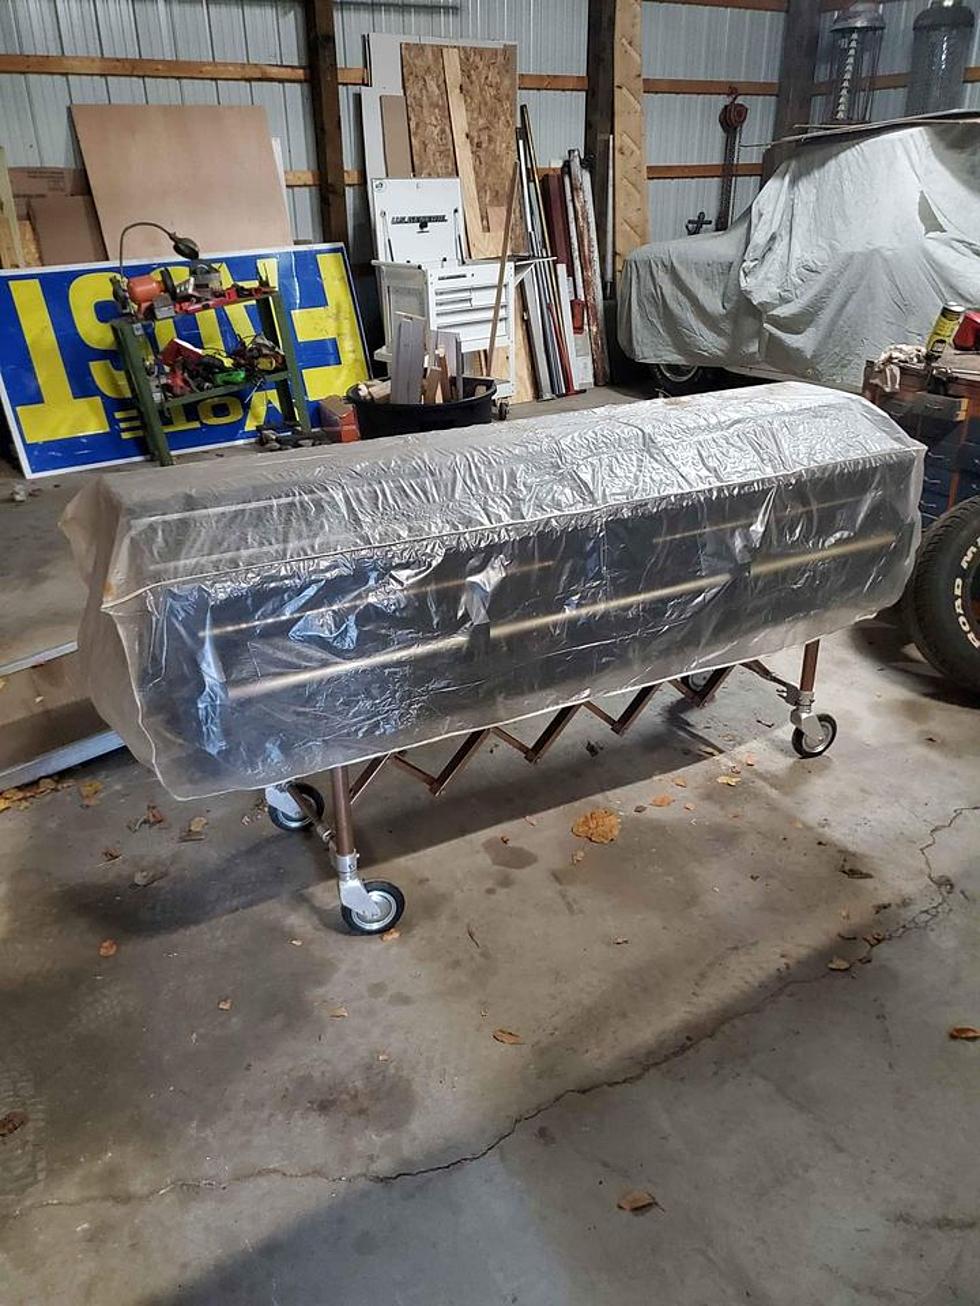 FOUND! Casket/Coffin for Sale in Sauk Rapids – Halloween or Real??